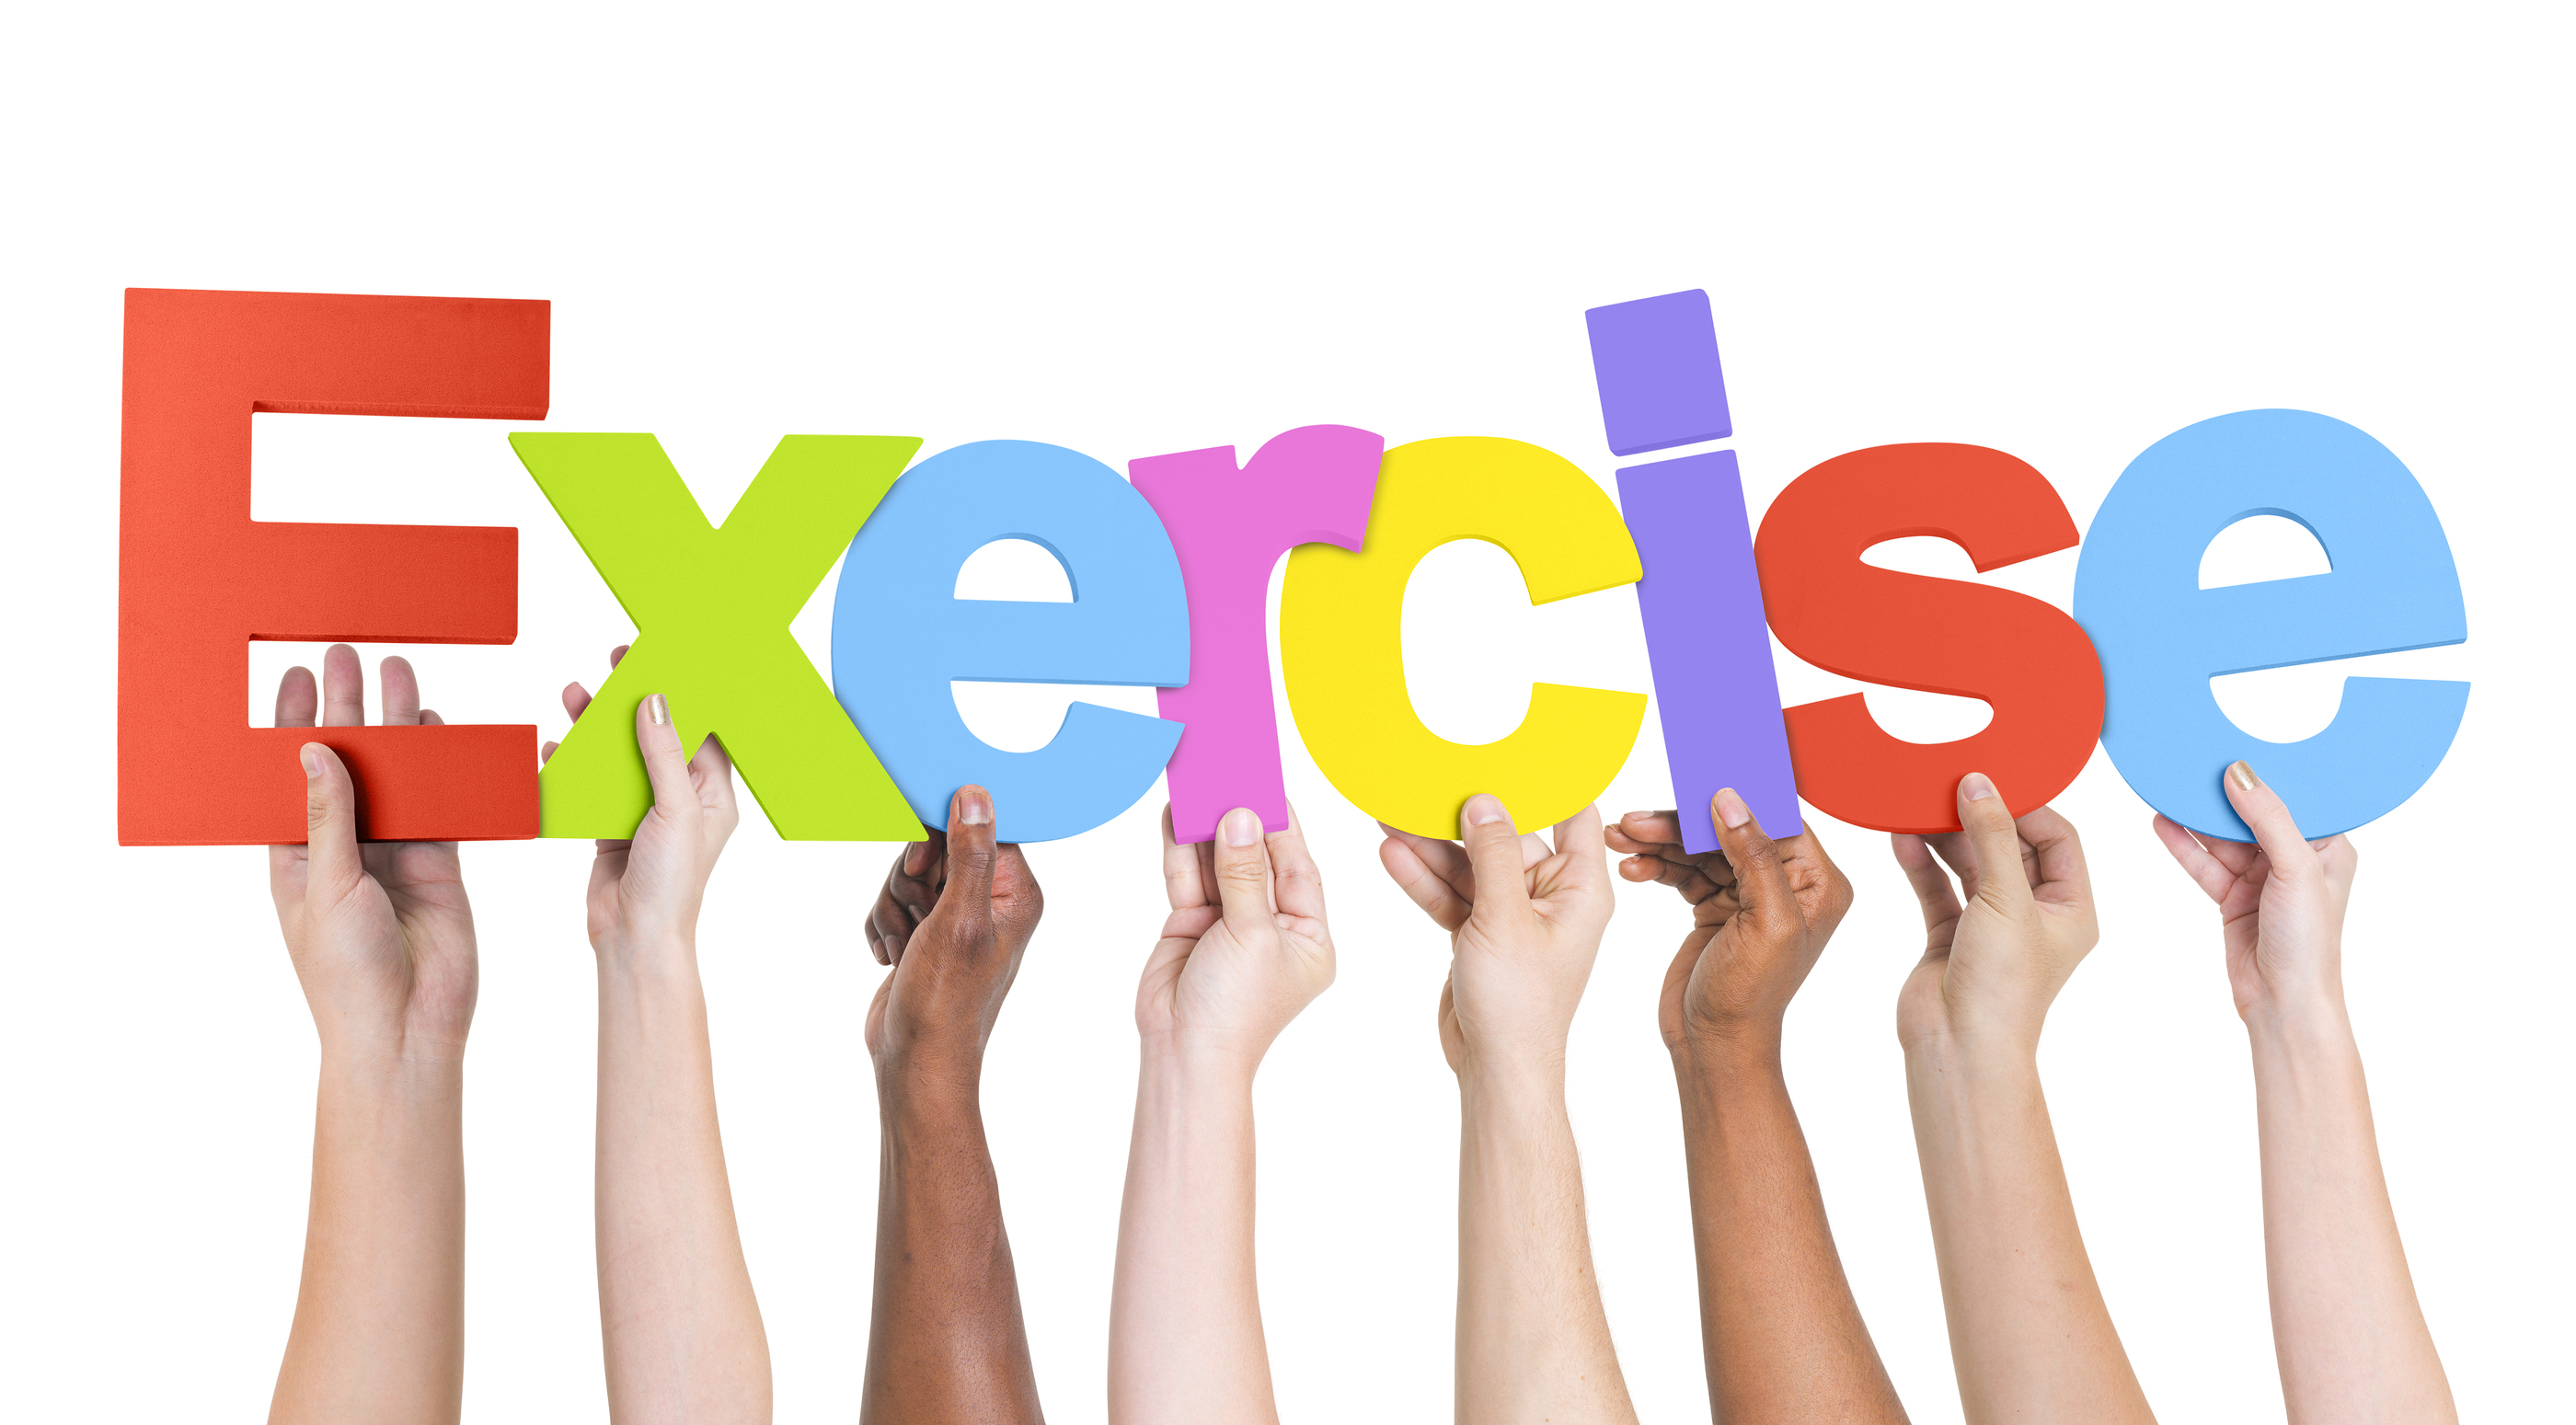 293 words essay on benefits of exercise